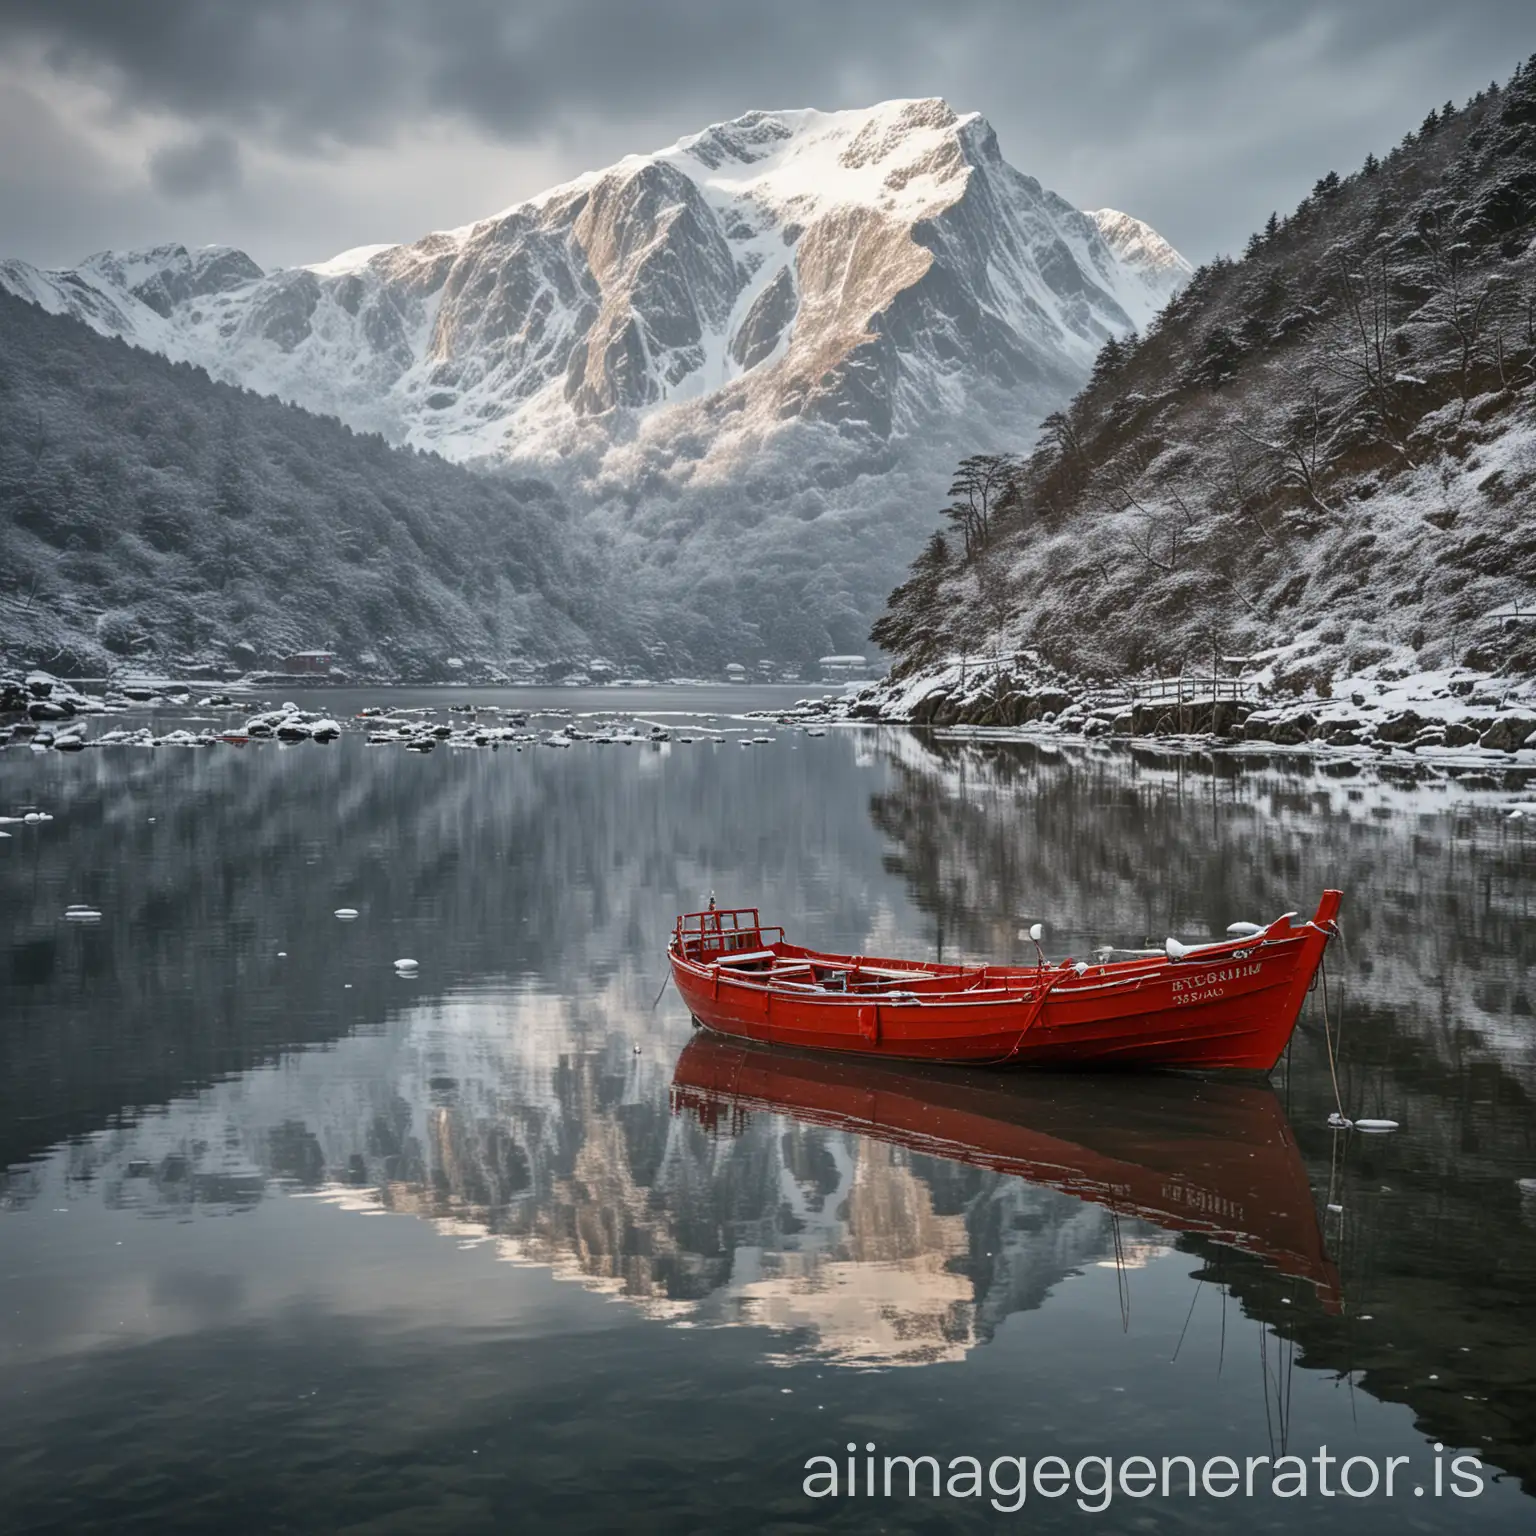 In a traditional Japanese painterly art style, A bright red fishing boat tied up in a mooring, surrounded by reflections on a still sea surface of a spectacular snow-capped mountain landscape. The scene is set in a peaceful fjord among rocky shores covered with snow and high jagged peaks. Partly cloudy skies allow soft light to fall over the pristine wilderness and the sturdy shape of the boat. The atmosphere is majestic and serene, showcasing a perfect combination of natural beauty and human intervention.